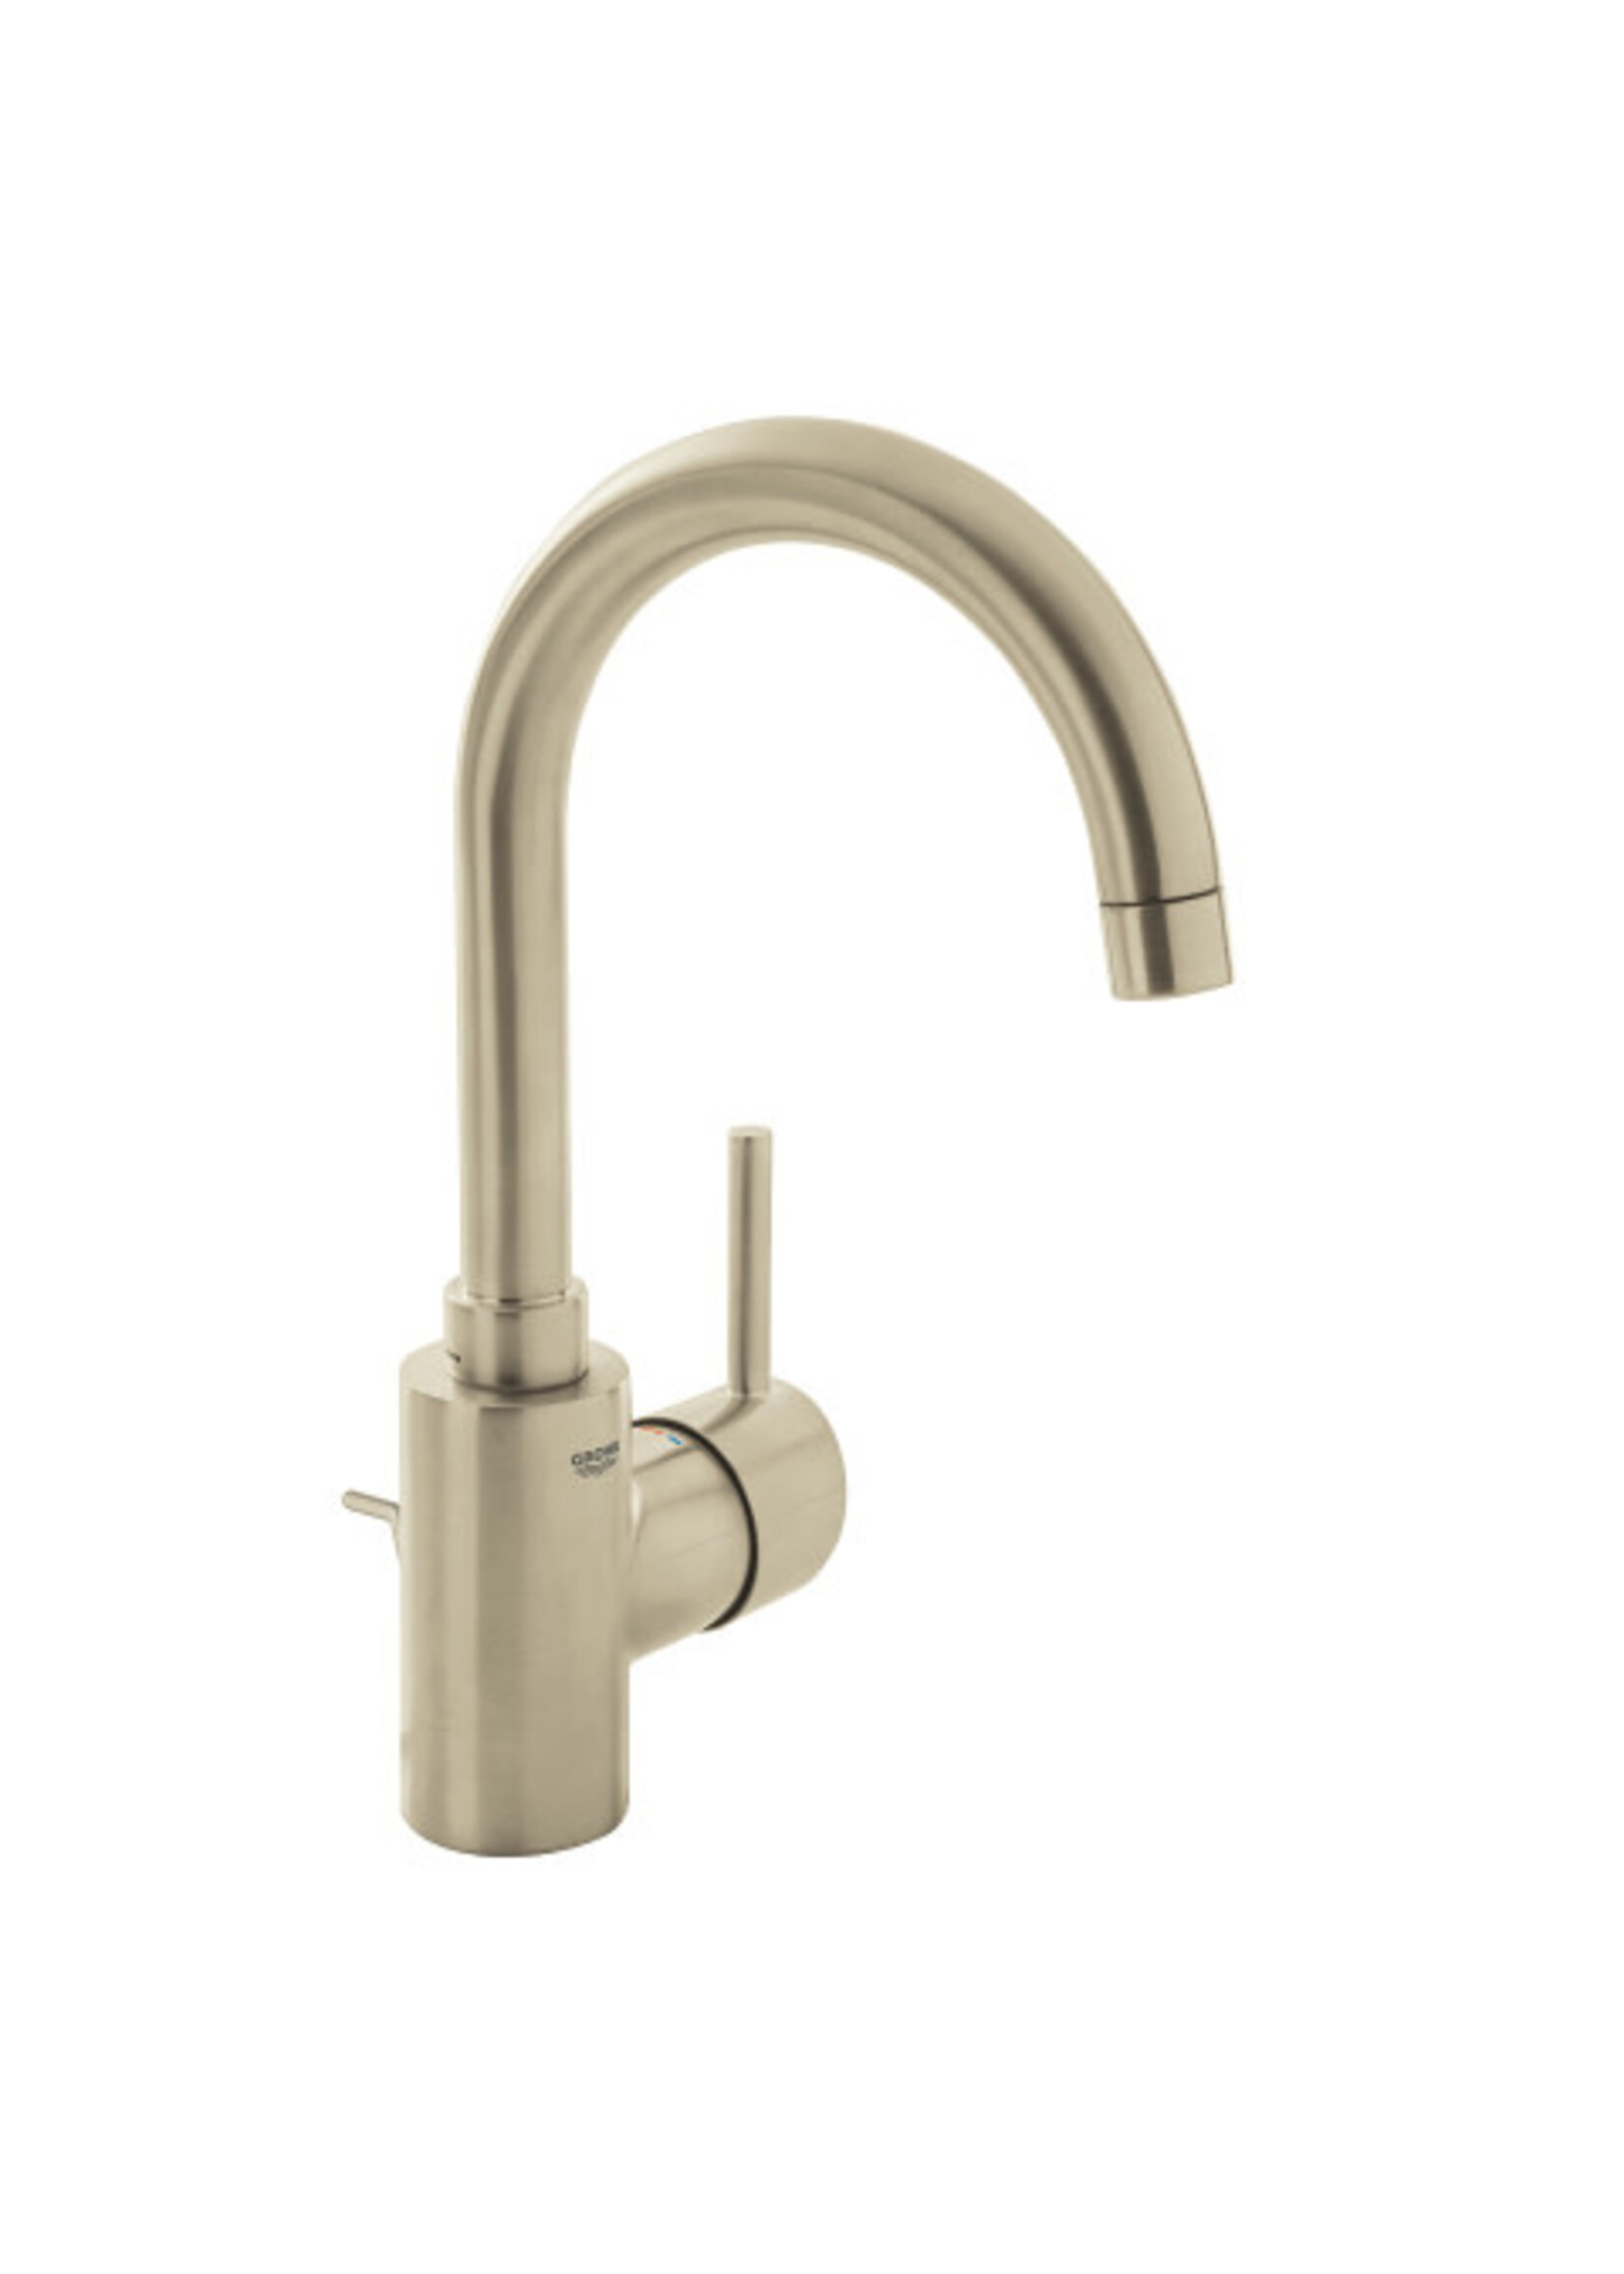 Grohe Grohe Concetto L - Size Single Handle Bathroom Faucet, 1.2GPM - Bru. Nickle